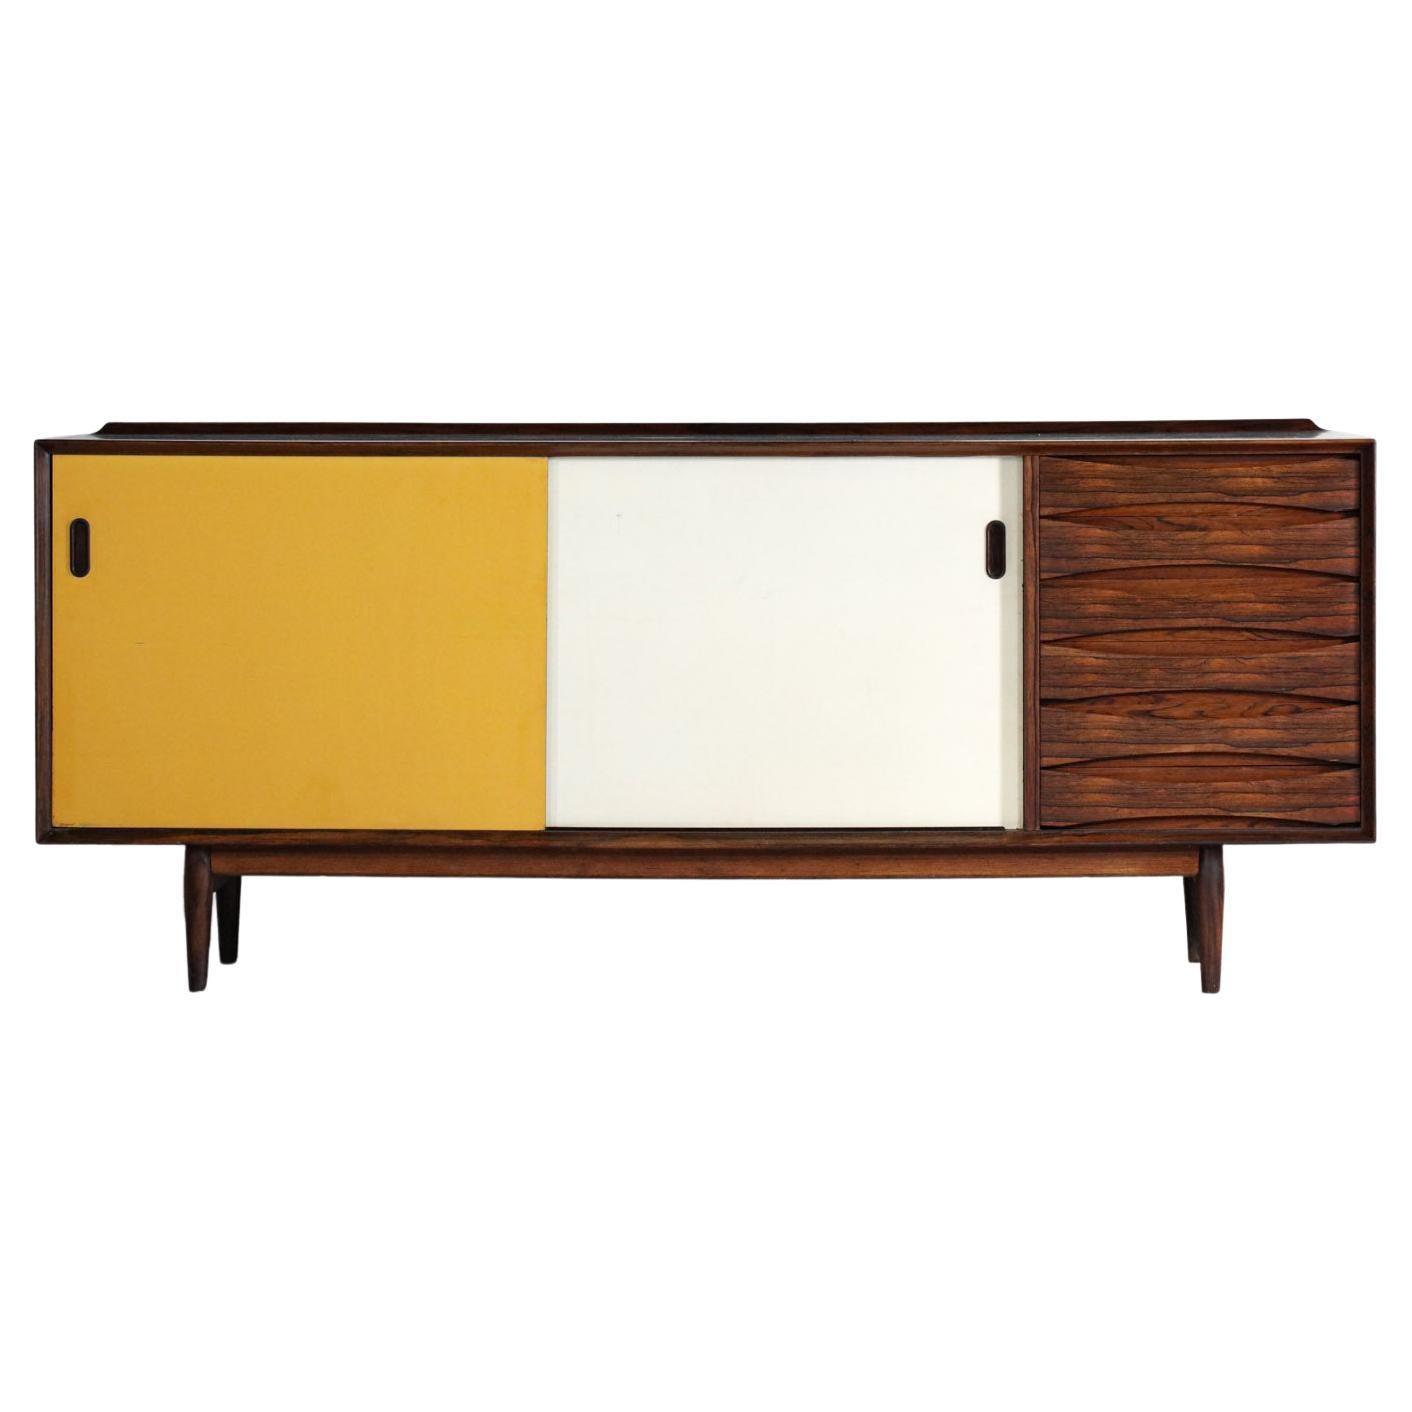 Beautiful scandinavian sideboard model 29 designed by the famous danish designer Arne Vodder for Sibast in the 60's. Solid and veneered rosewood structure. The front is composed of six half-moon drawers, two reversible sliding doors (painted in